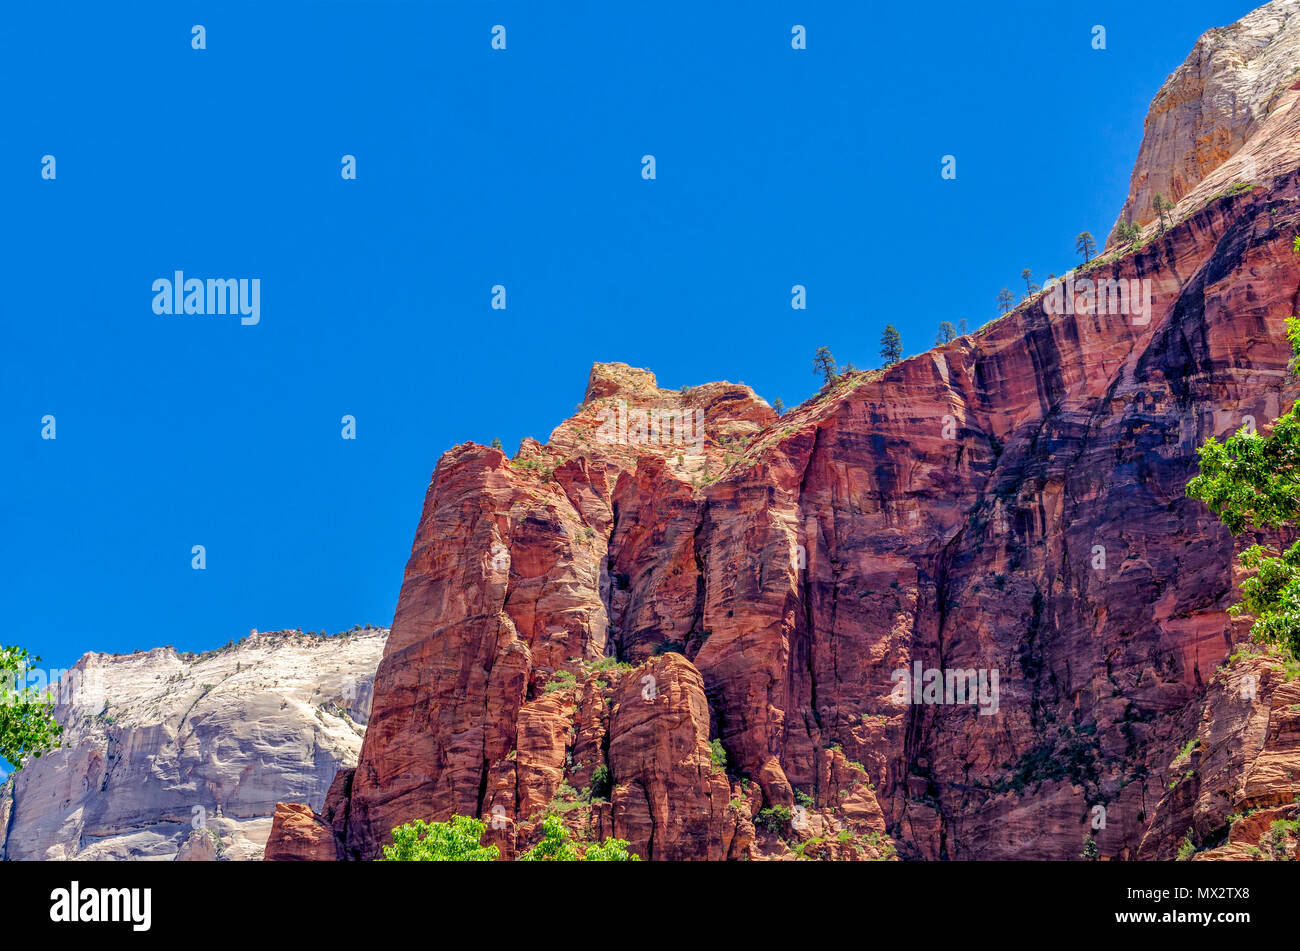 Looking at at tall solid rock mountain, red orange in color under a clear blue sky. Stock Photo